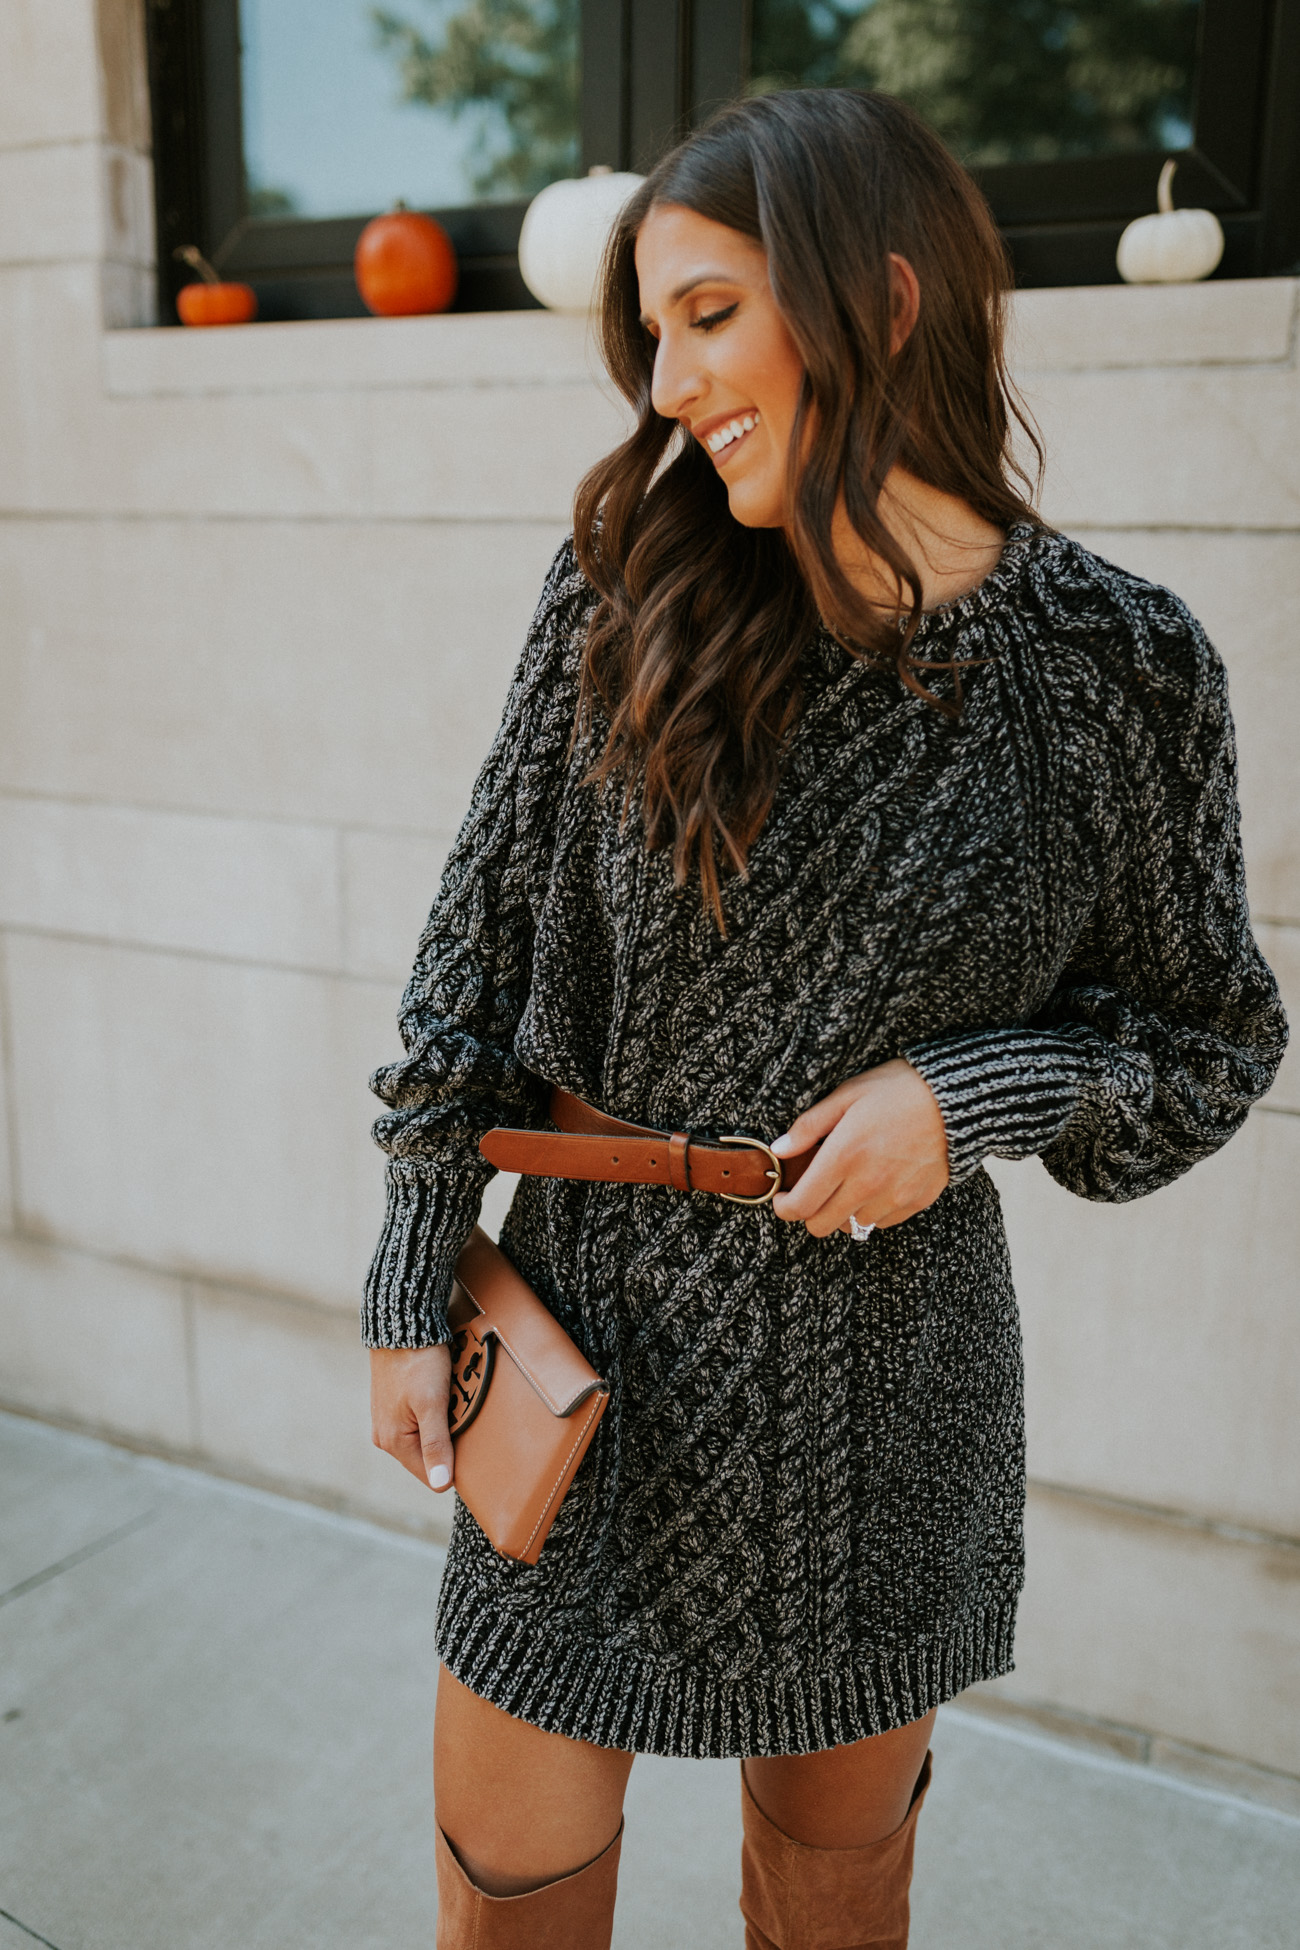 cable knit sweater dress, free people dress, sweater dress, over the knee boots, over the knee suede boot, tory burch miller clutch, fall style, fall outfit, fall inspo, cozy fall outfit // grace white a southern drawl